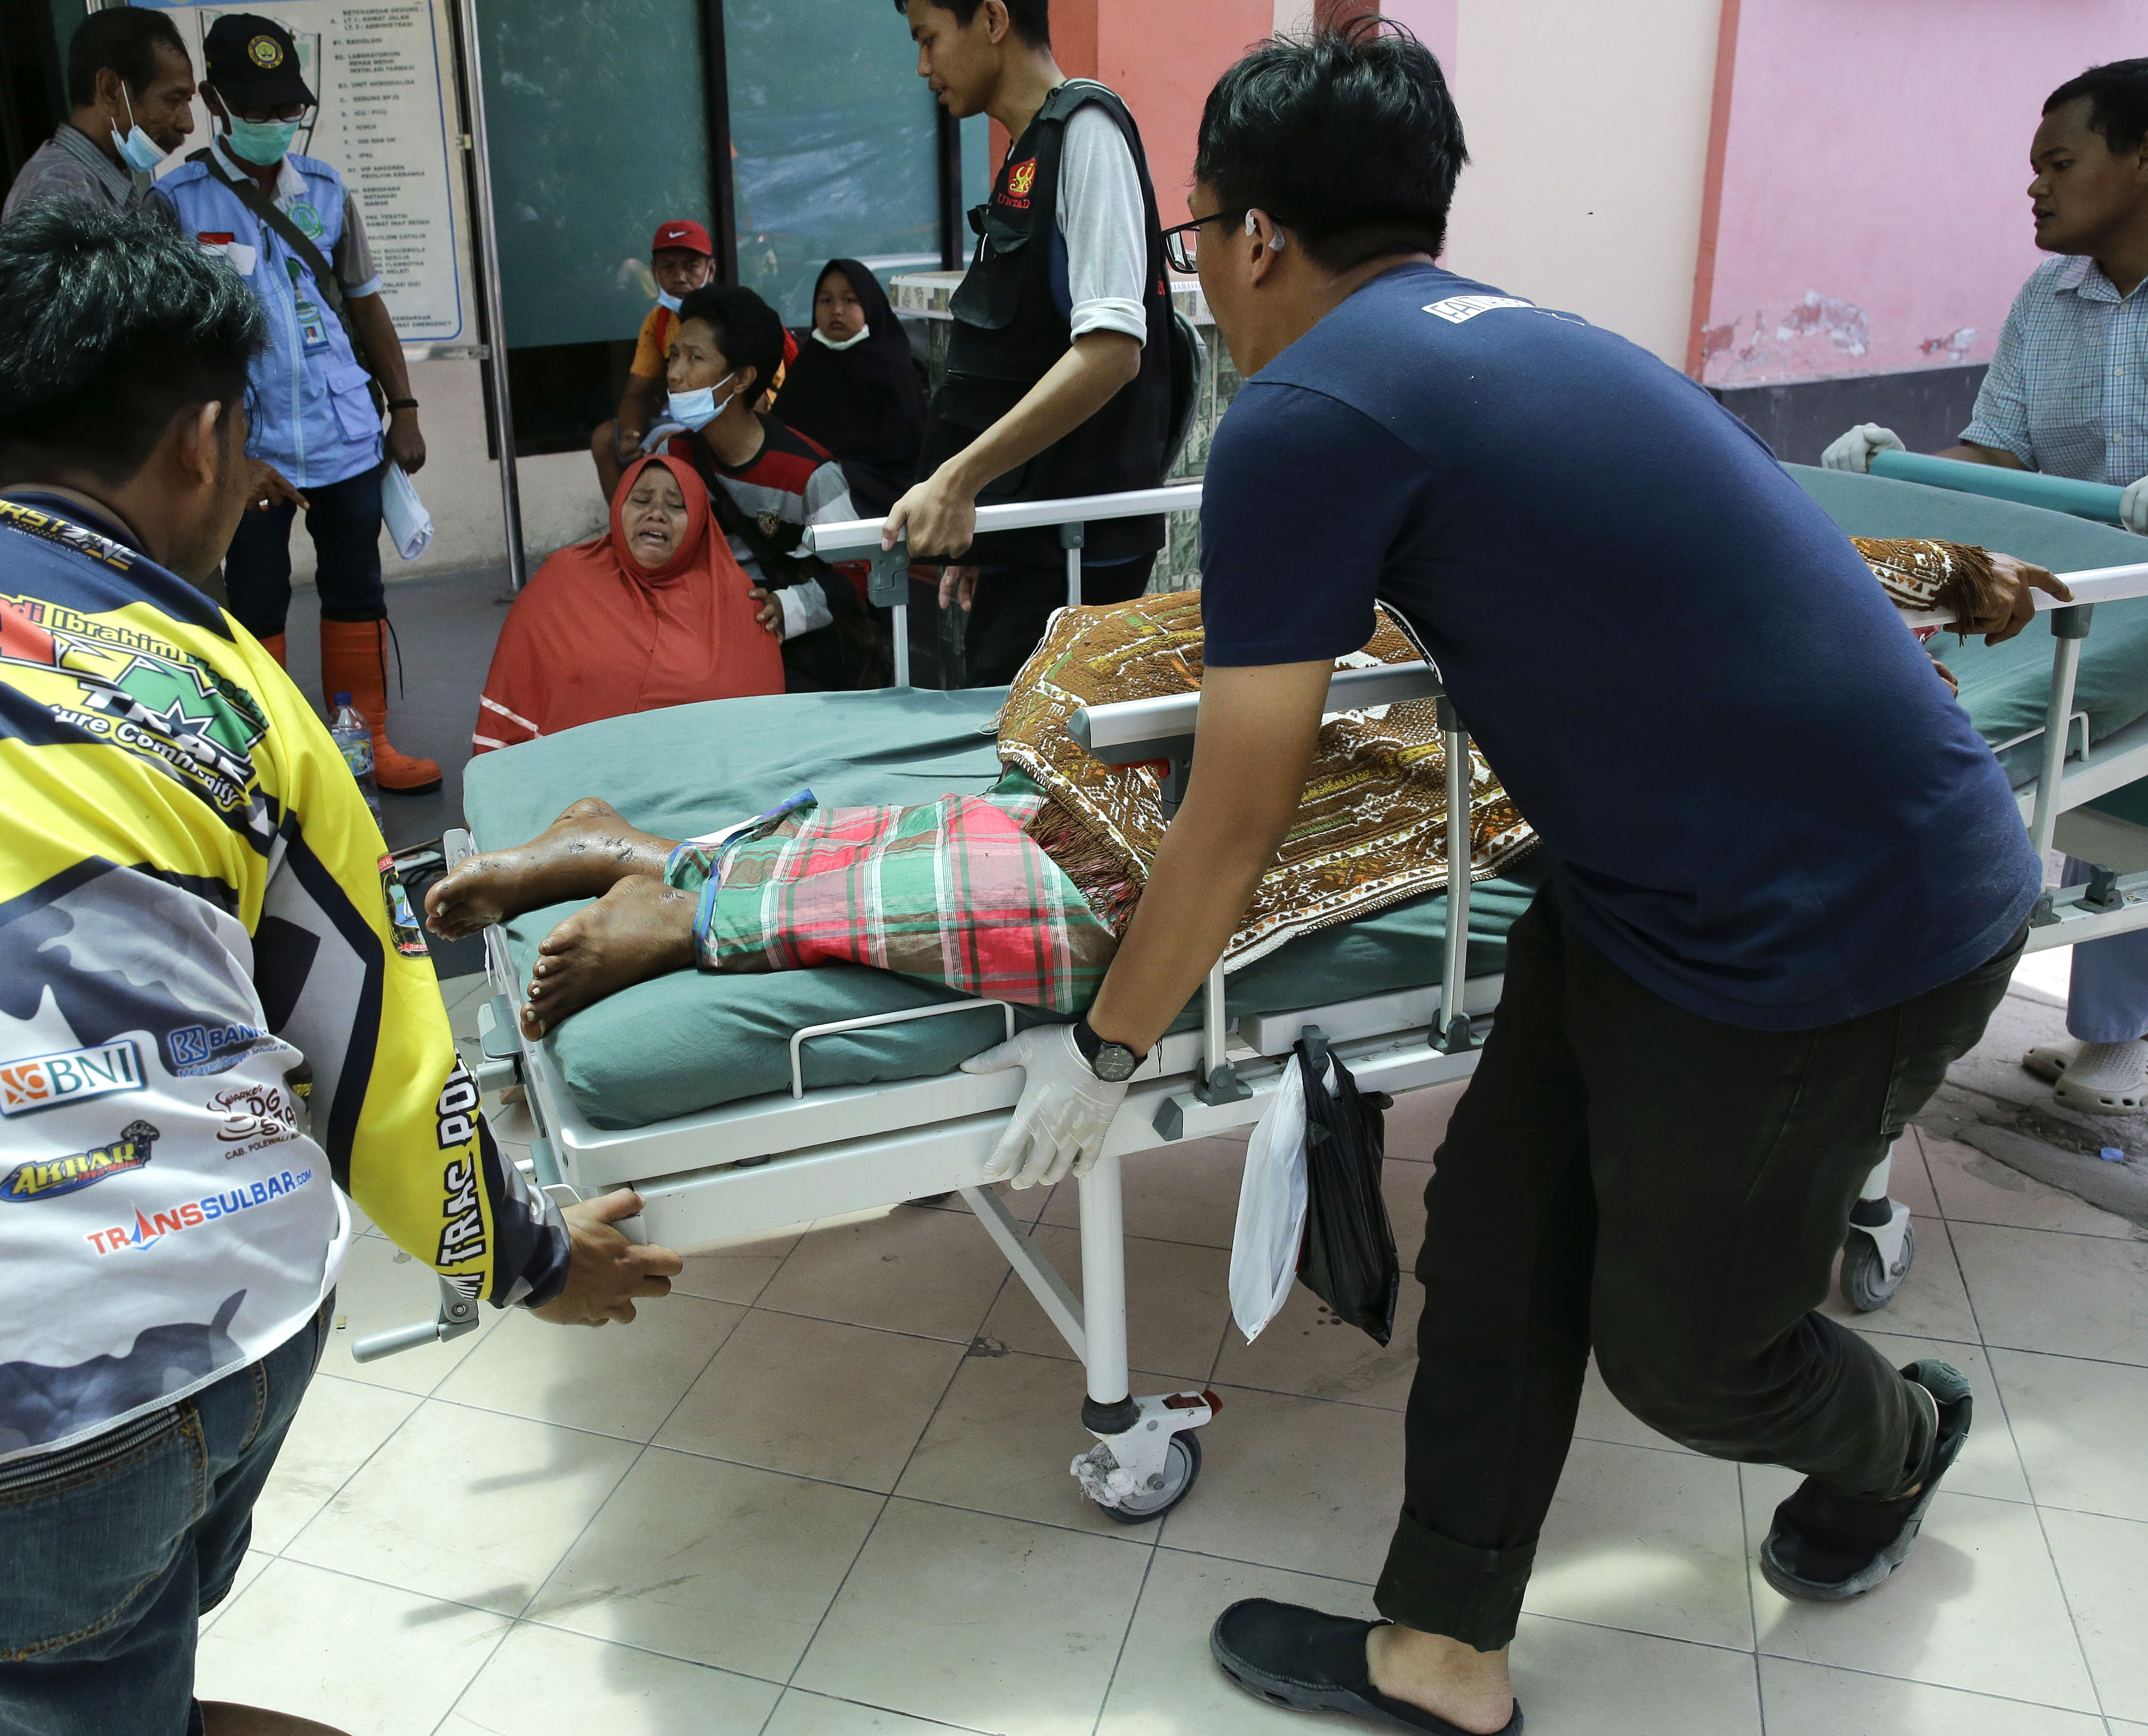 An injured man is brought to the hospital as one woman cries after learning about her daughter's death in a massive earthquake and tsunami in Palu, Central Sulawesi, Indonesia Thursday, Oct. 4, 2018. Nearly a week after a magnitude 7.5 quake spawned a deadly tsunami on Indonesia’s island of Sulawesi, countless people have yet to find their loved ones _ both survivors and the dead. As of Thursday, the official death toll was 1,424, with 113 people missing. Many families, though, never registered their losses with police, and others have failed to identify them before they were buried anonymously in mass graves.(AP Photo/Aaron Favila)